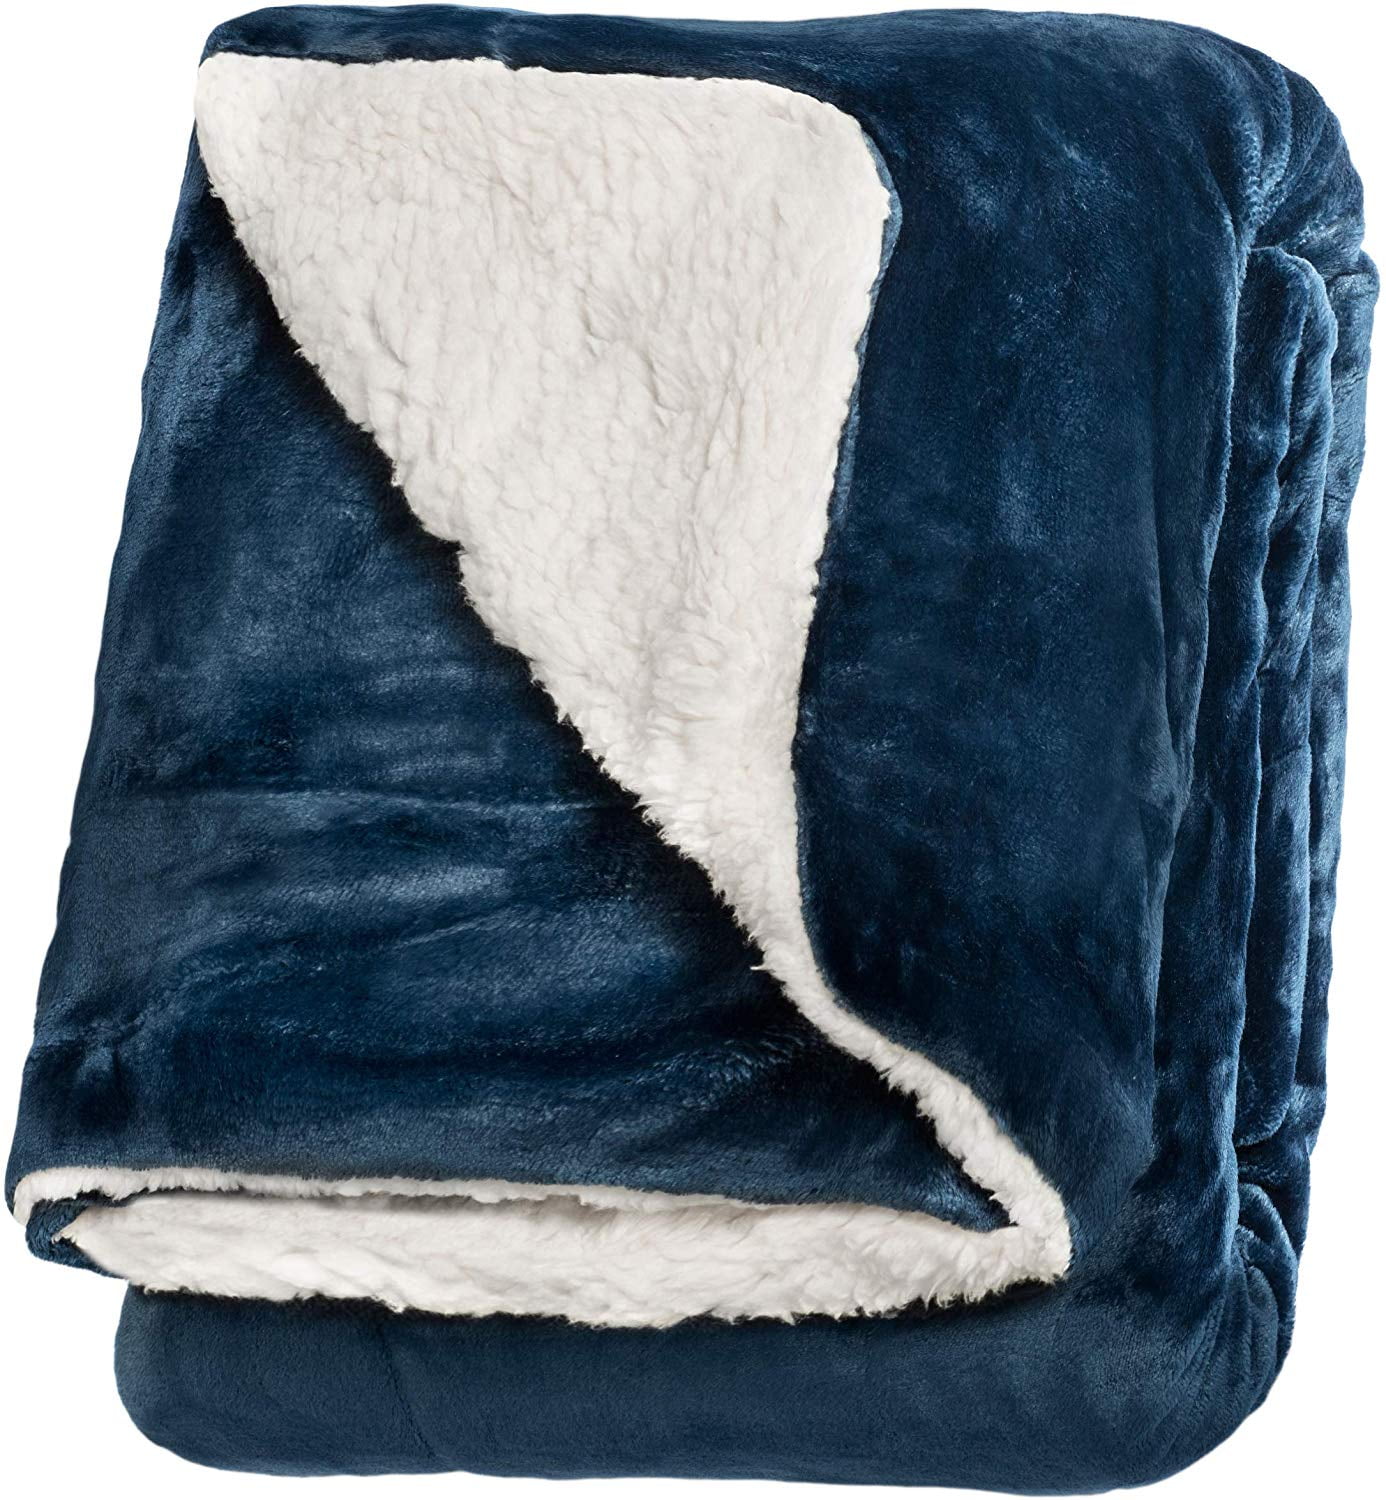 Details about   Life Comfort Plush Polyester 60"x70" Large All Season Blanket for Bed or Couch U 